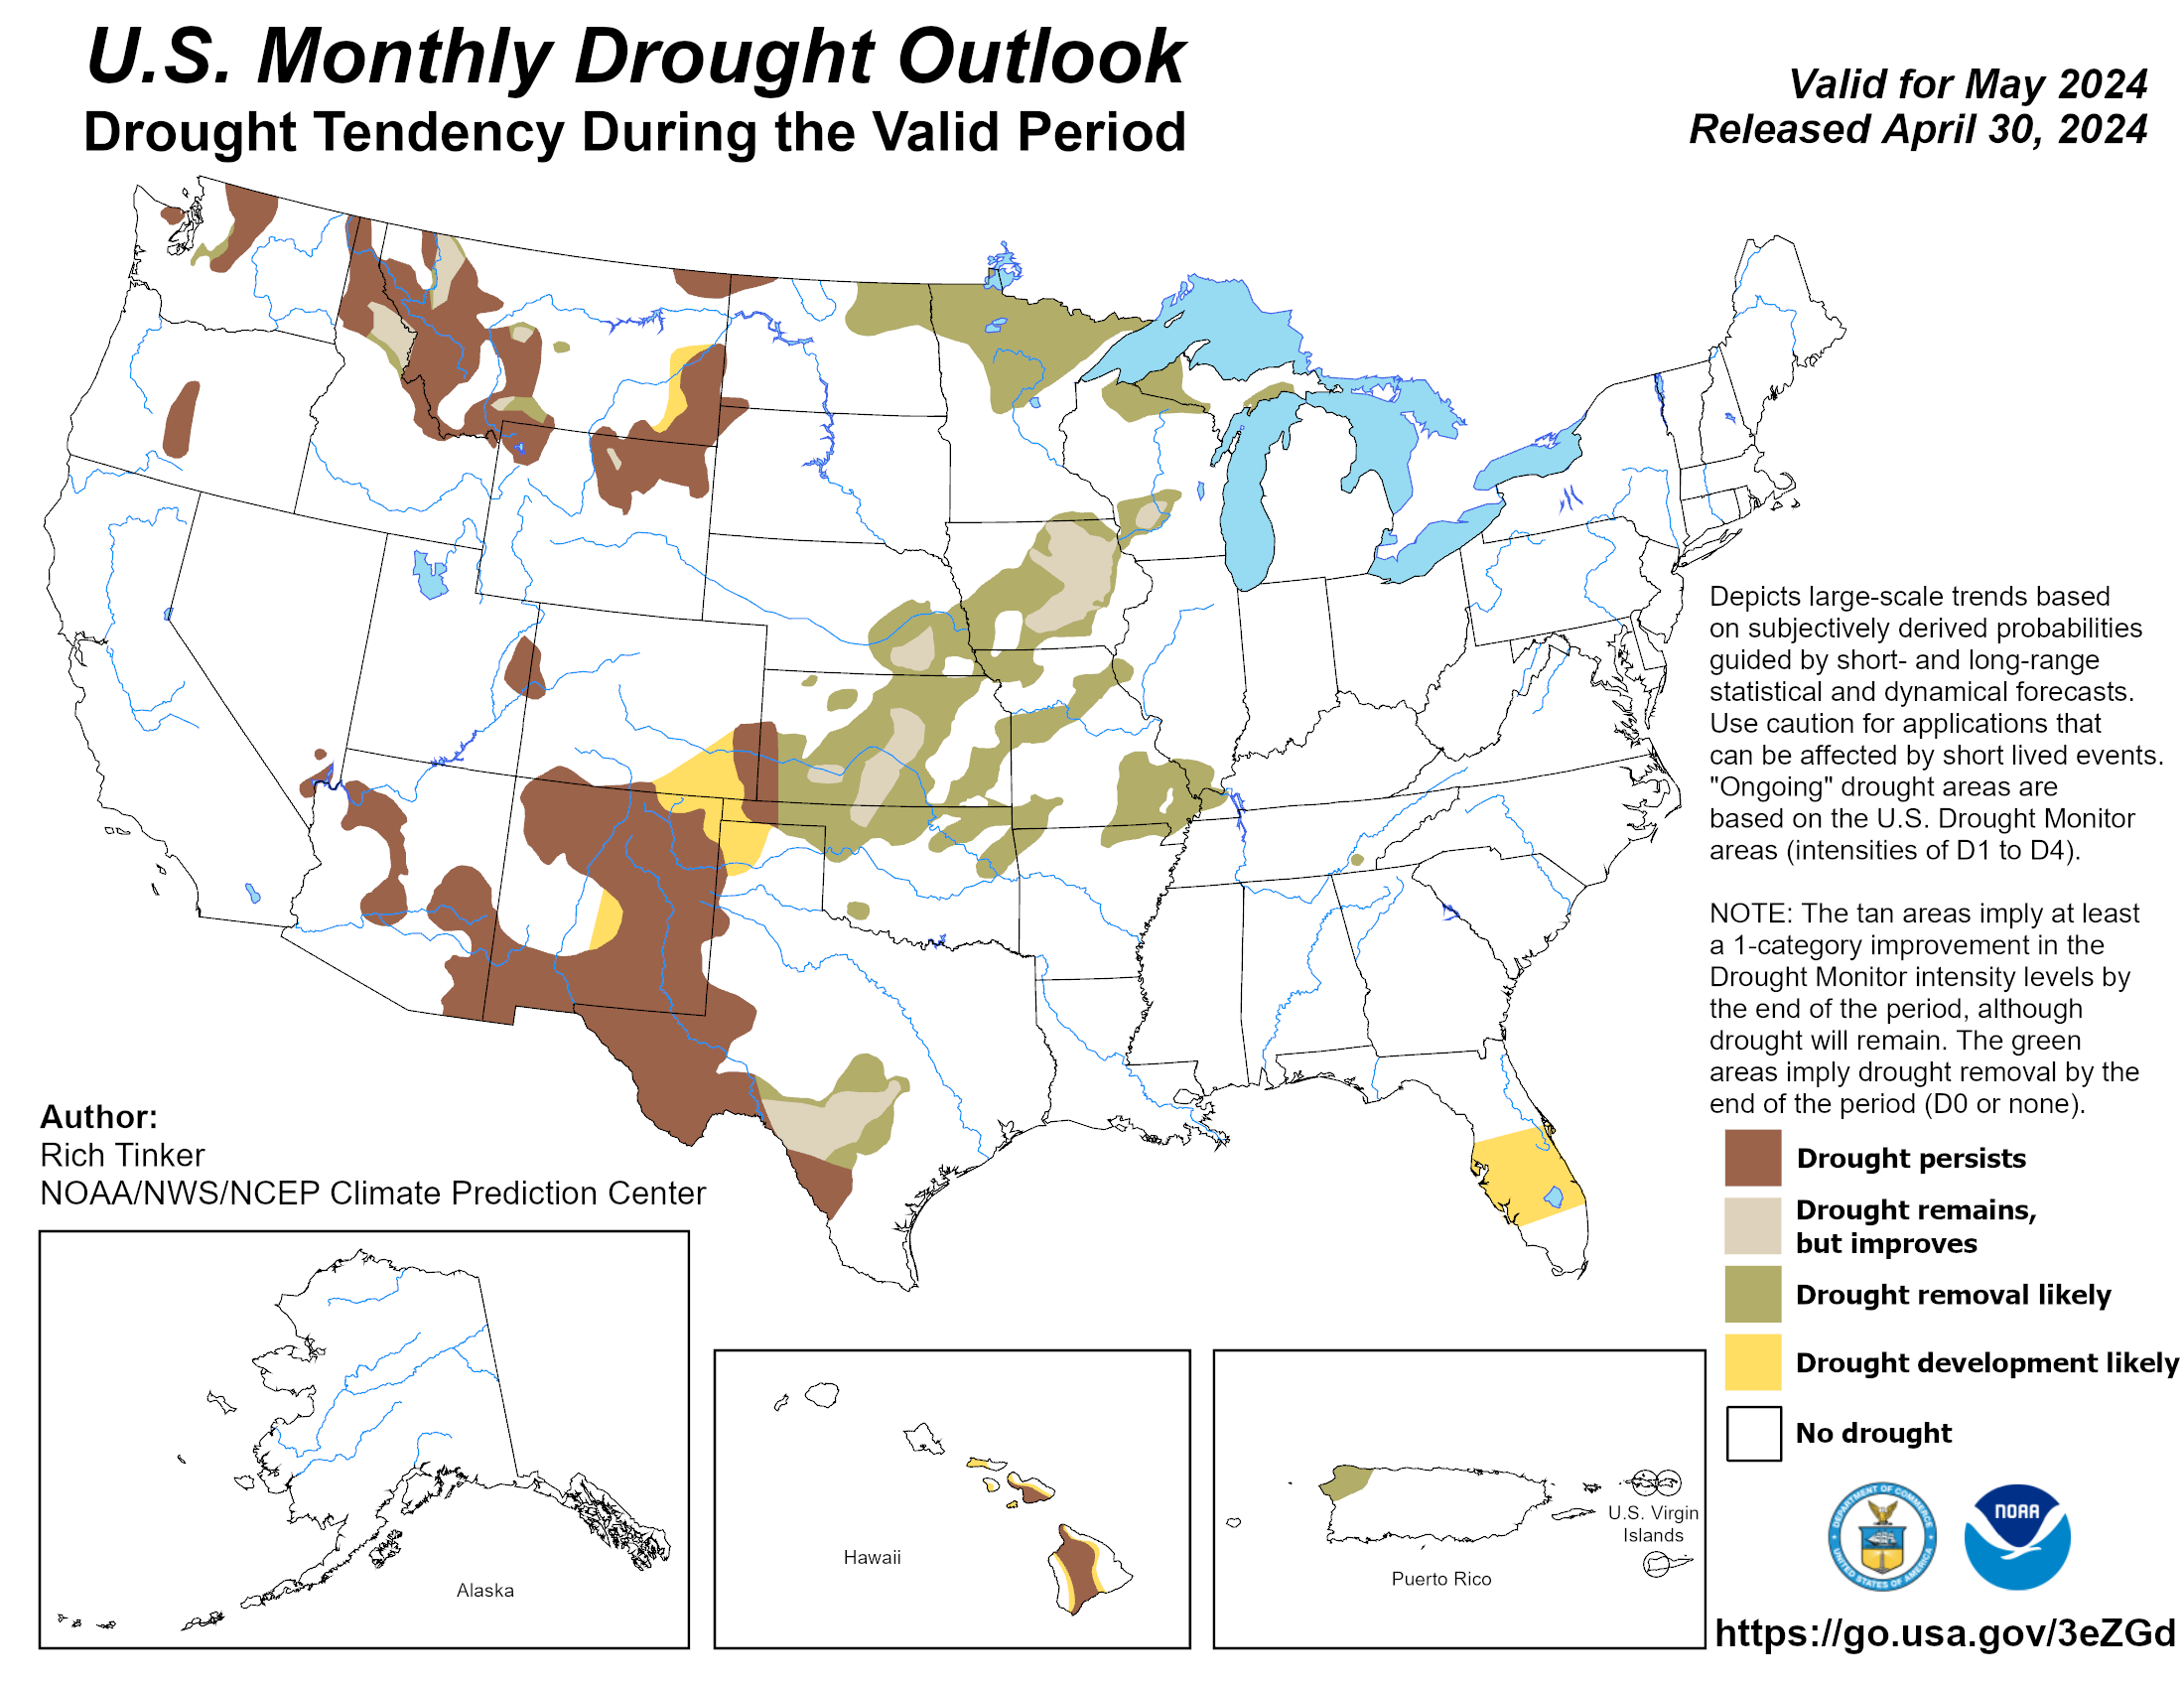 Monthly Drought Outlook image